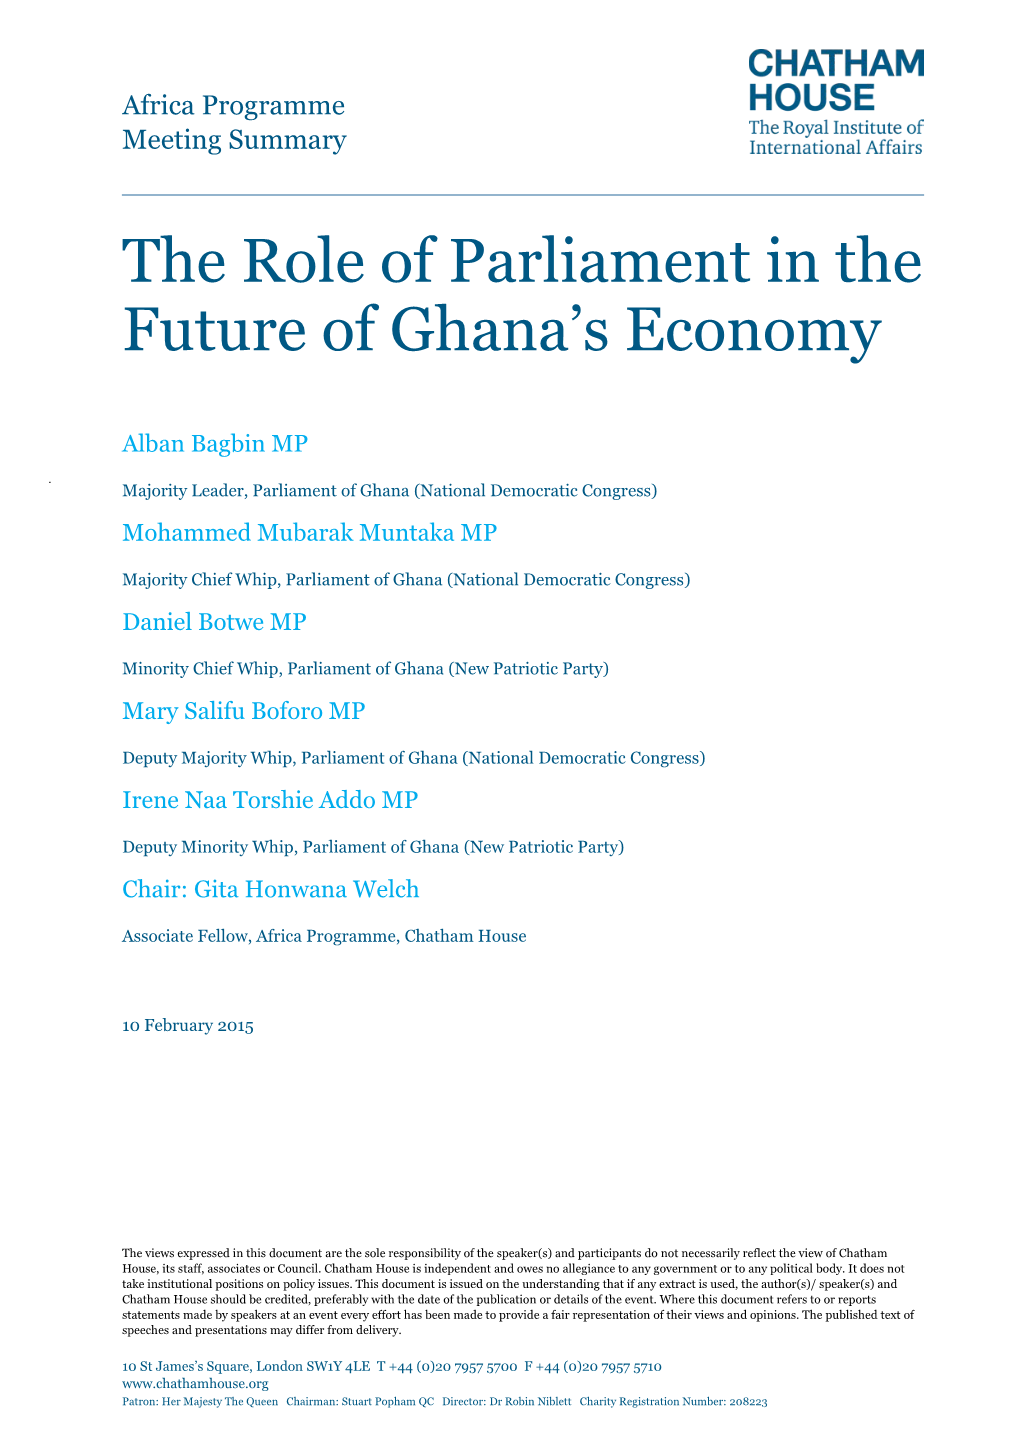 The Role of Parliament in the Future of Ghana's Economy